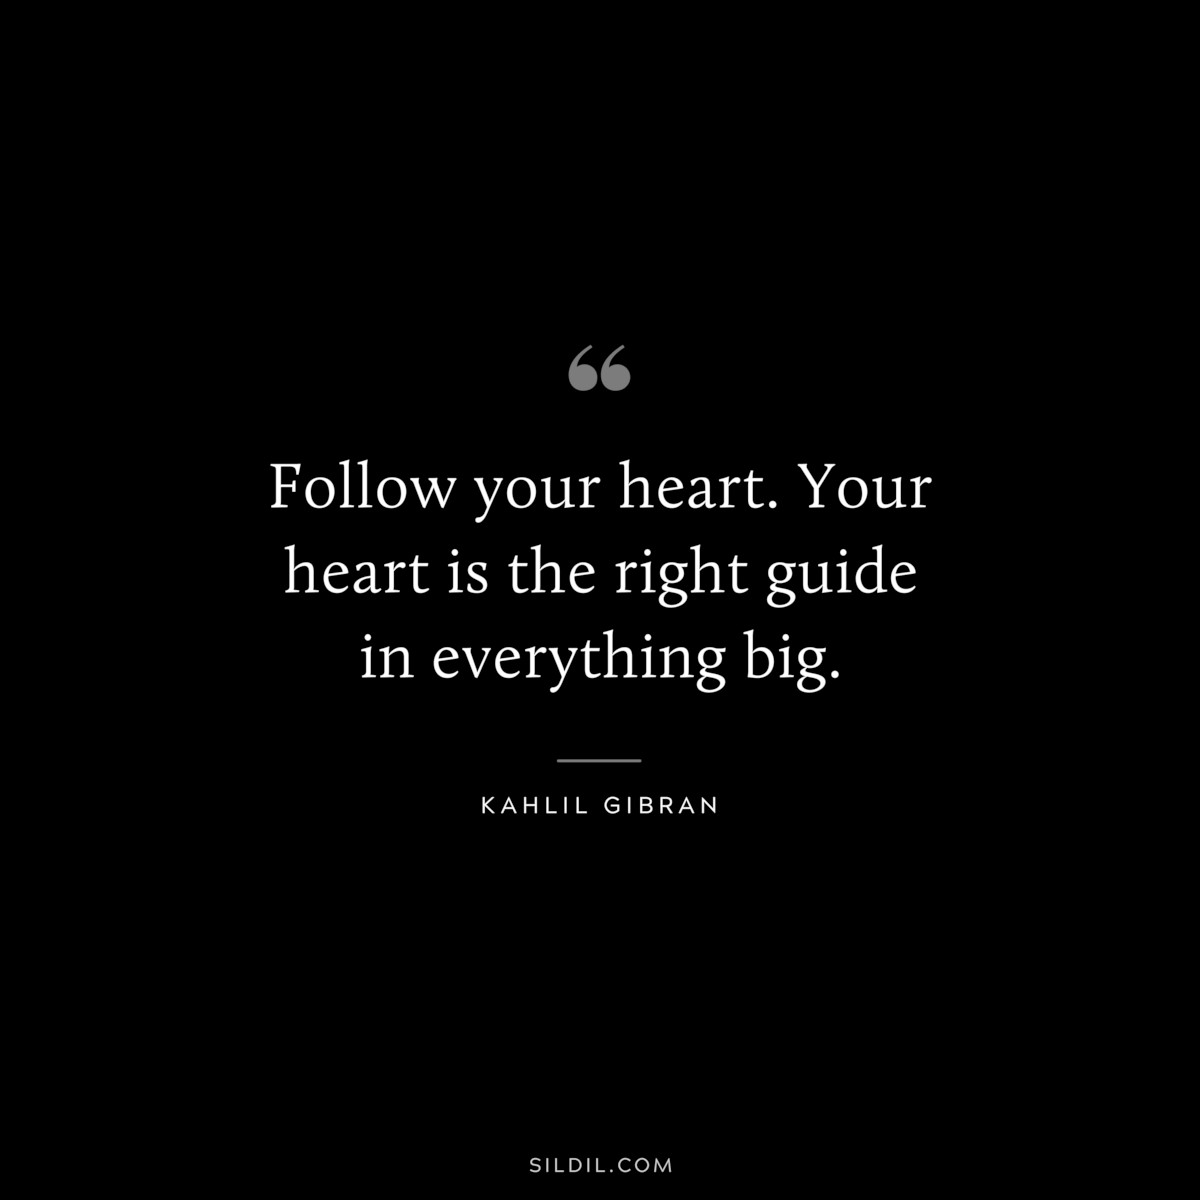 Follow your heart. Your heart is the right guide in everything big. ― Kahlil Gibran